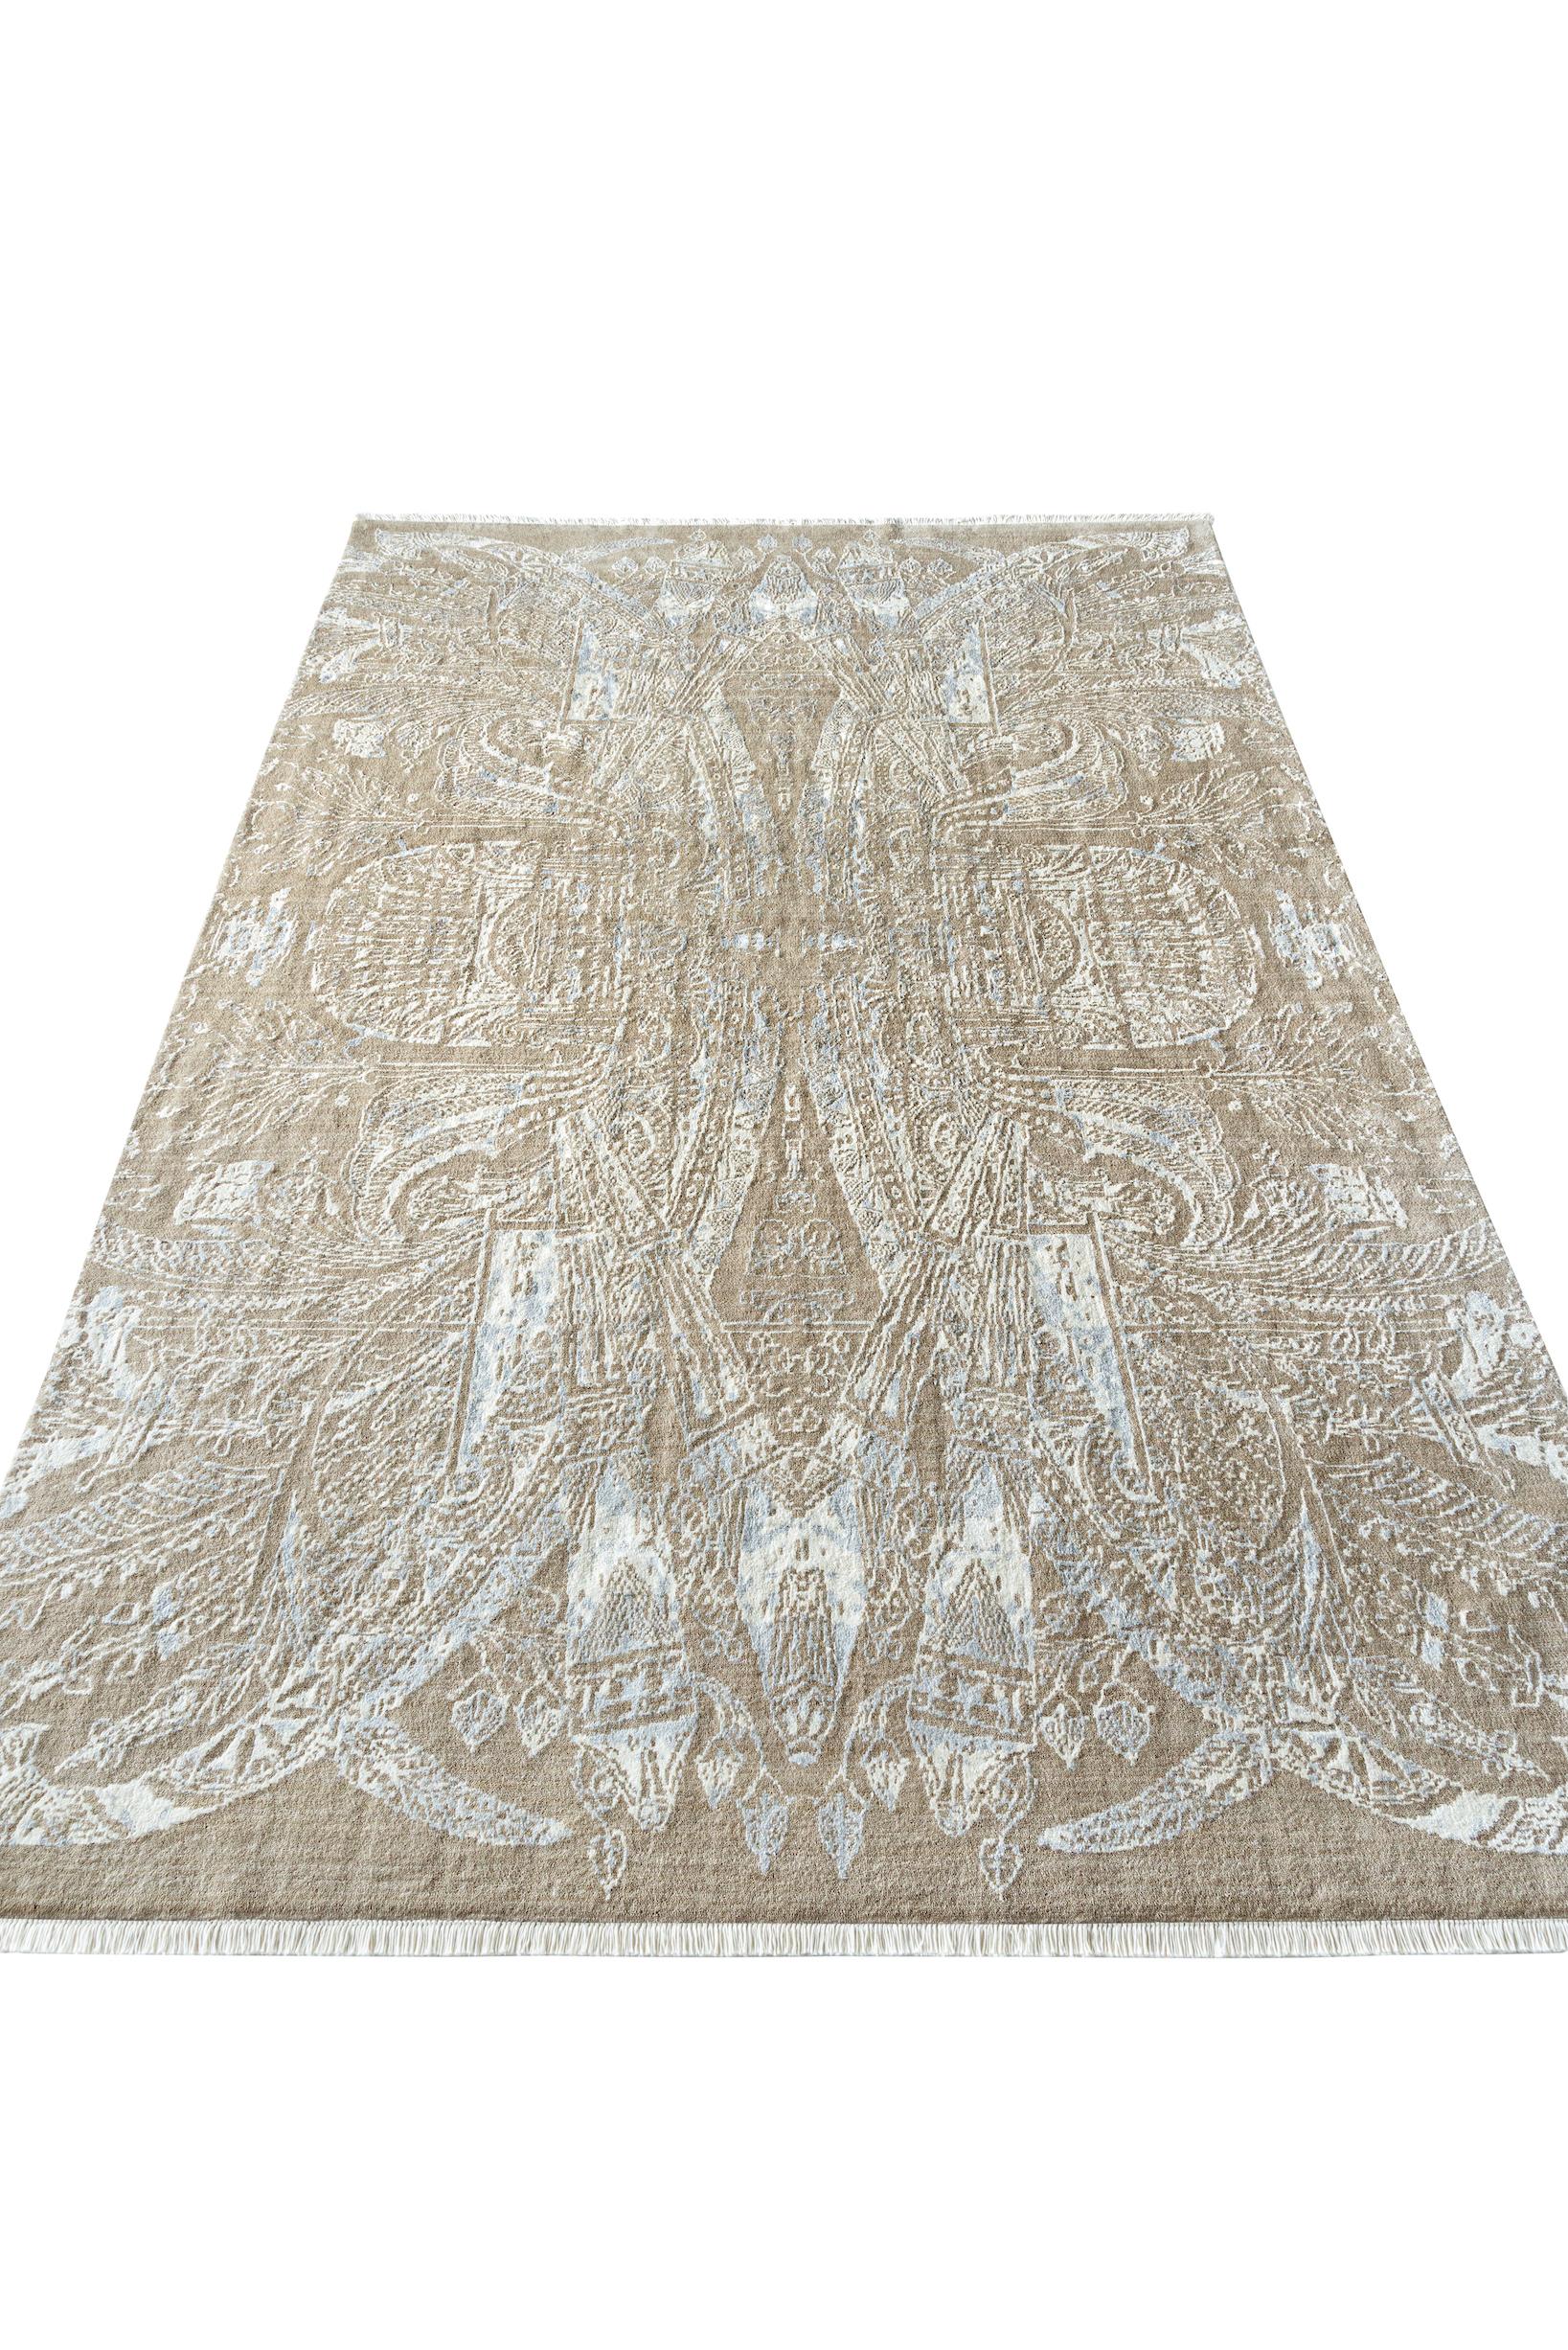 About the rug:
This is a hand-knotted rug with 160,000 knots per square meter in a double knot construction. It is made of face yarn that is Egyptian wool with bamboo silk inlays, and the warp and weft are 100% Egyptian cotton. The pile height is